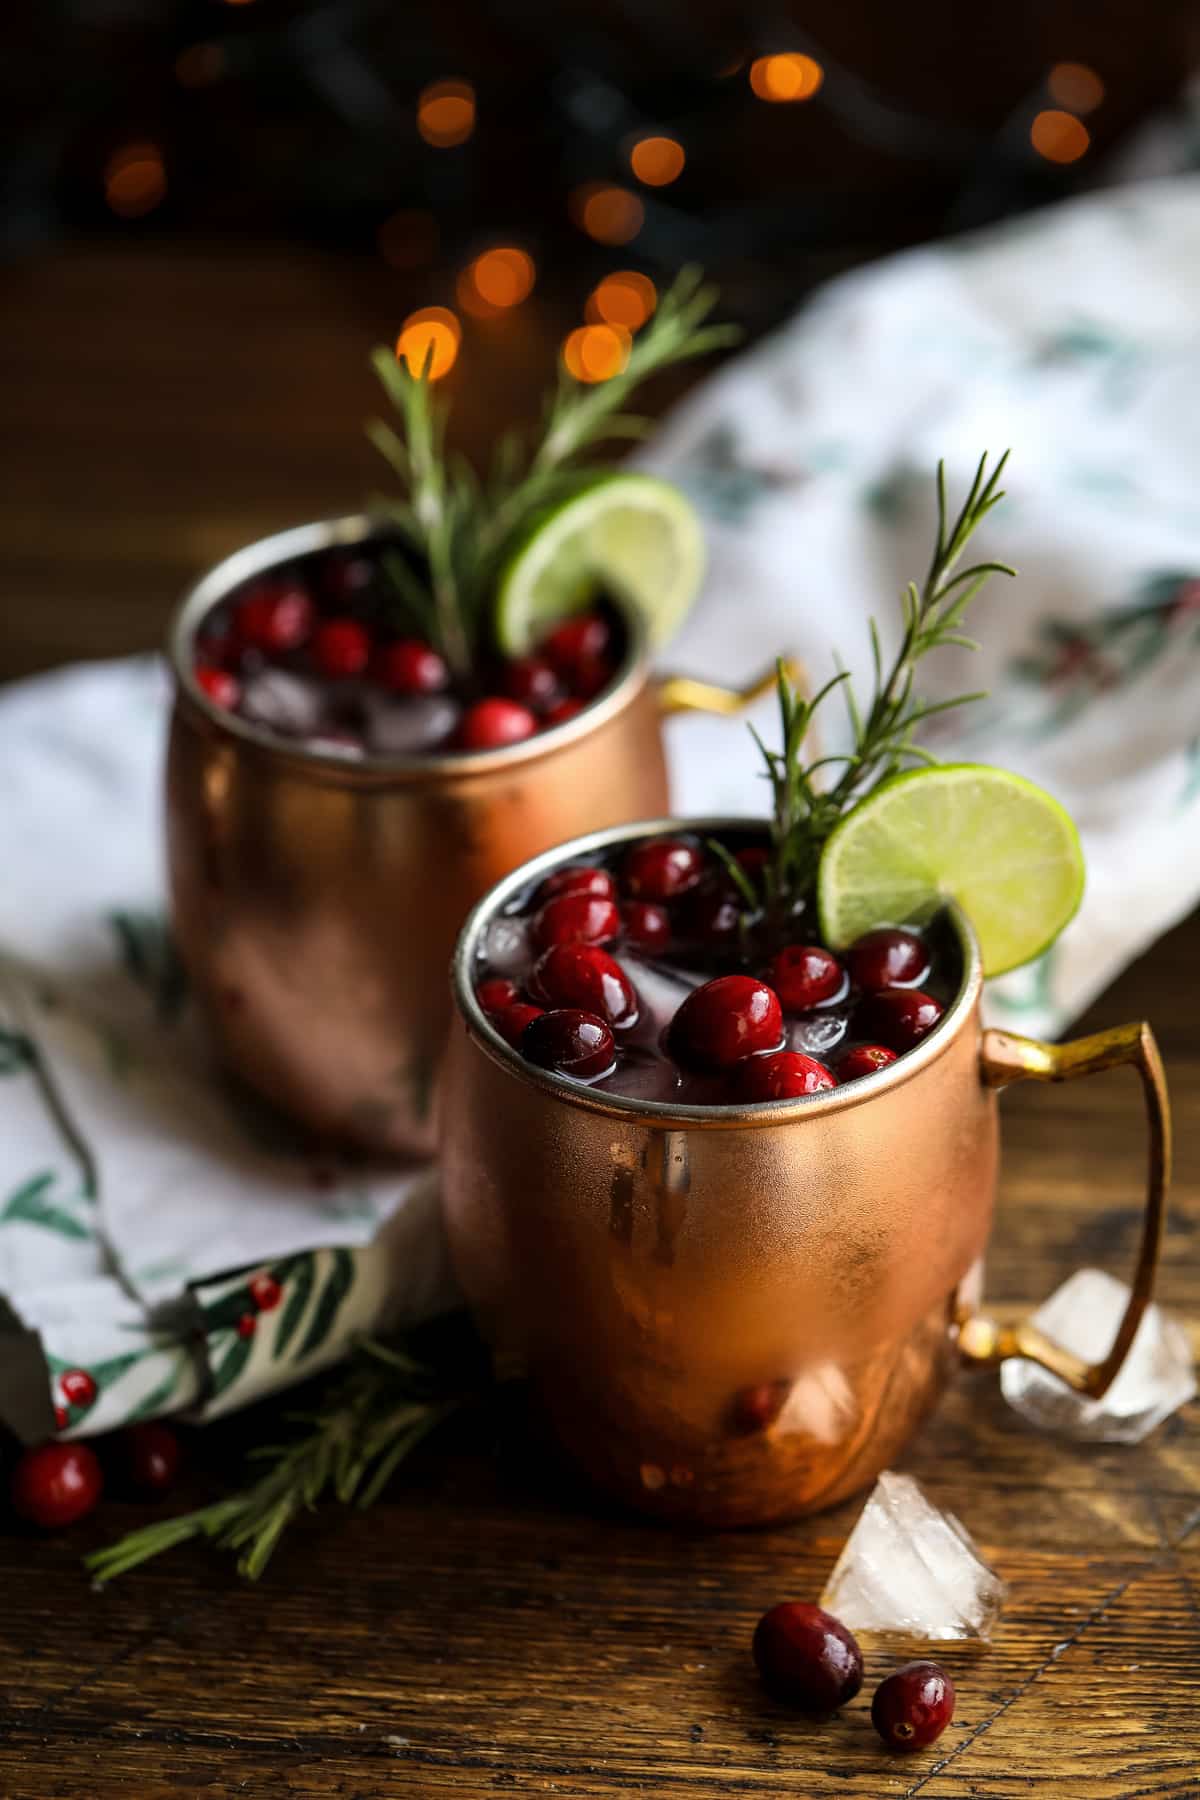 Photo of a holiday-looking moscow mule in a frosty copper mug. Garnished with rosemary and a fresh lime wedge. Cranberries are floating in the drink as well.